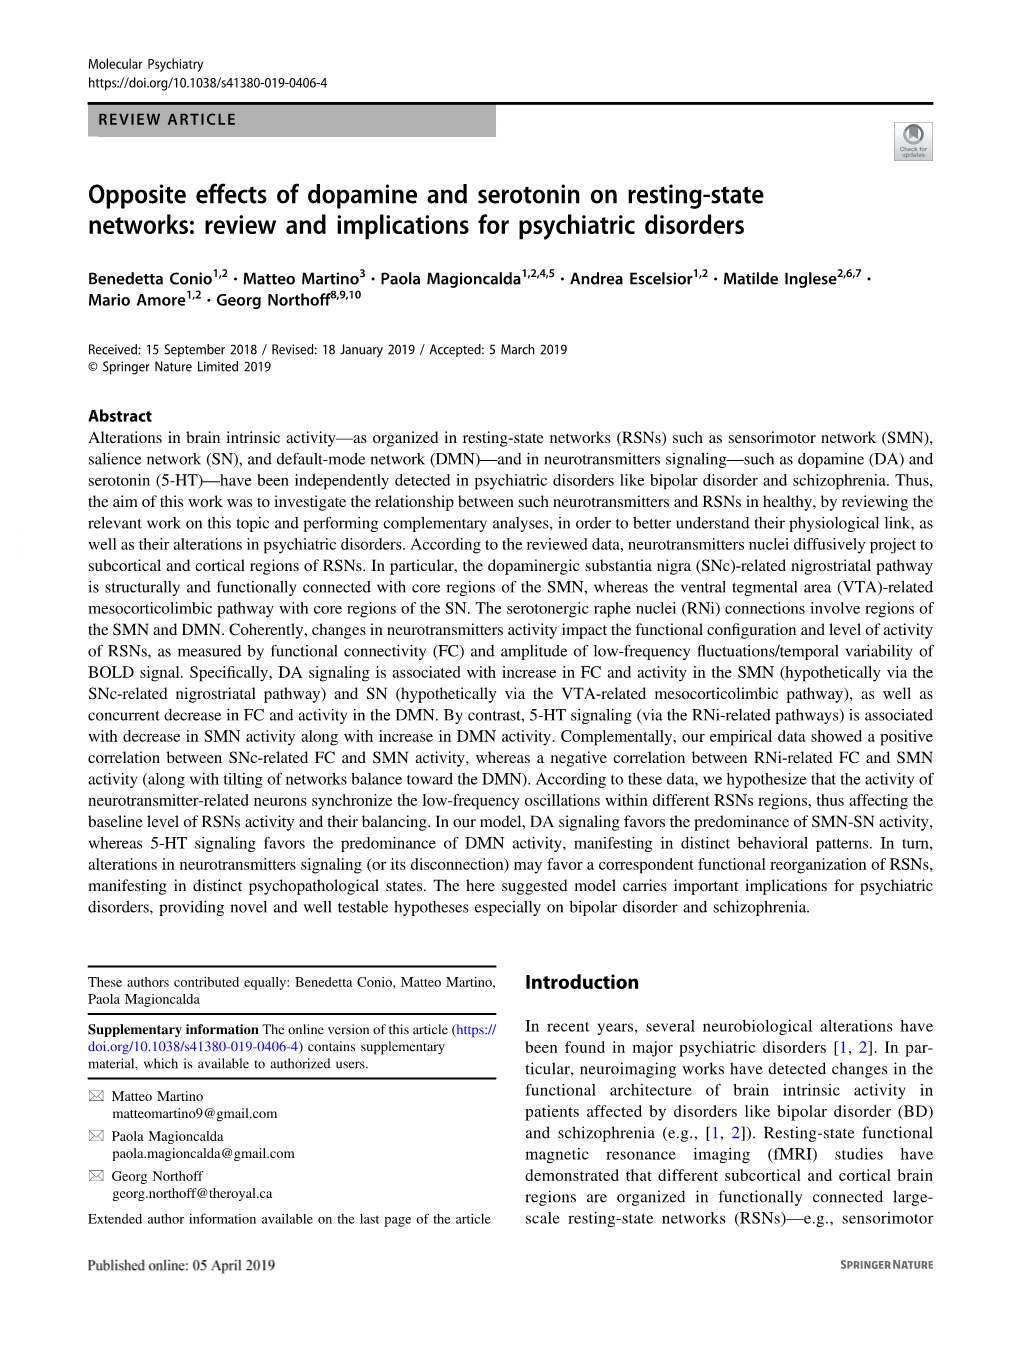 Opposite Effects of Dopamine and Serotonin on Resting-State Networks: Review and Implications for Psychiatric Disorders